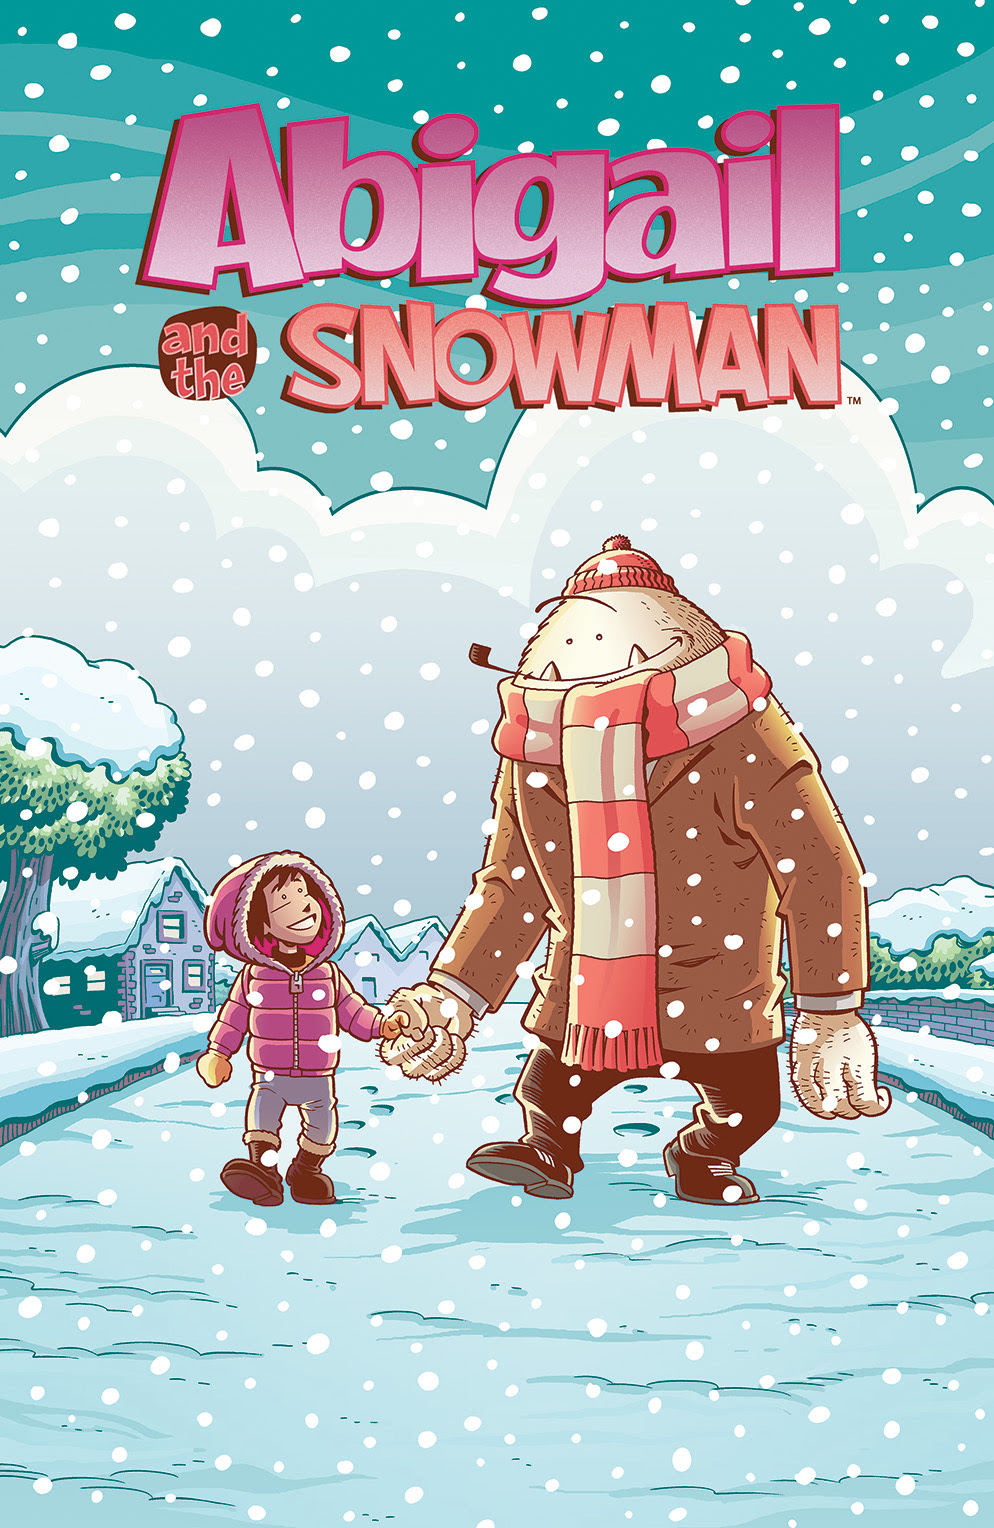 ABIGAIL AND THE SNOWMAN #1 Cover A by Roger Langridge